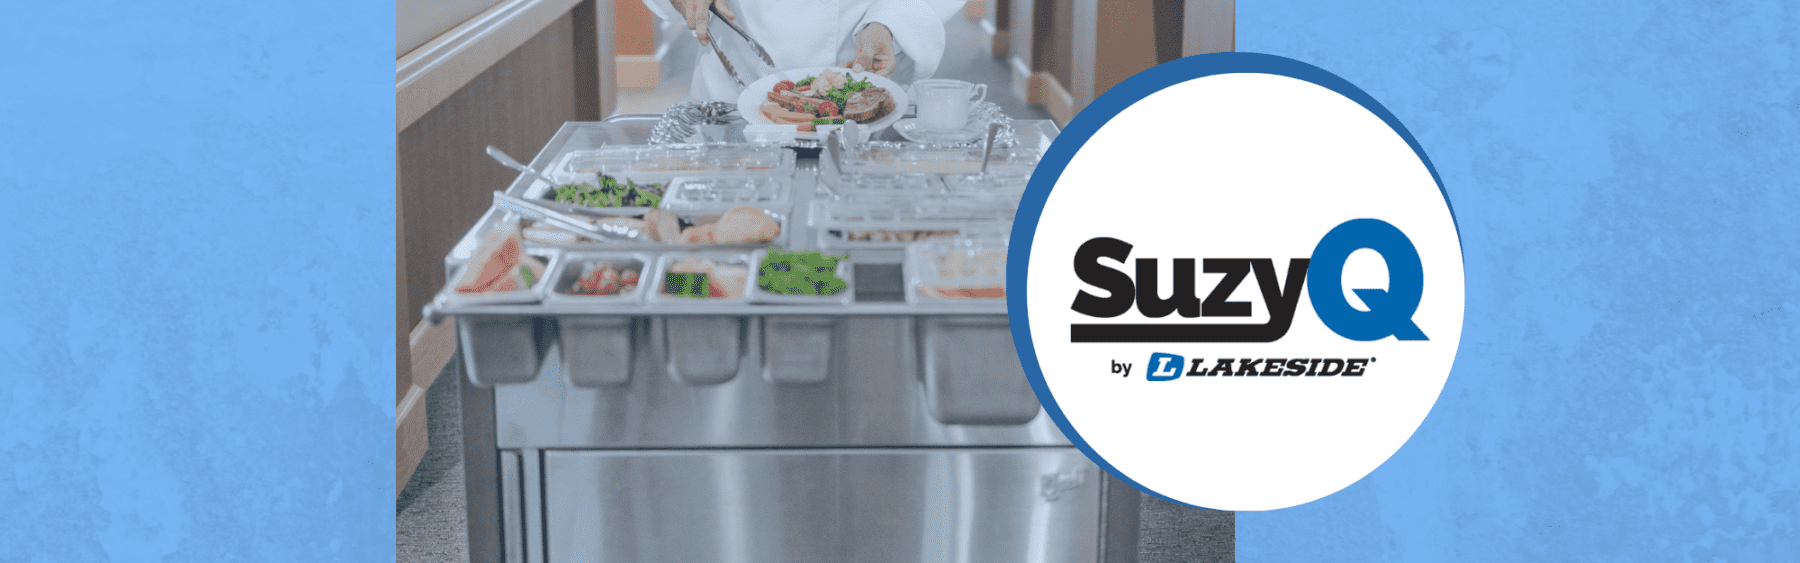 suzyq meal delivery cart